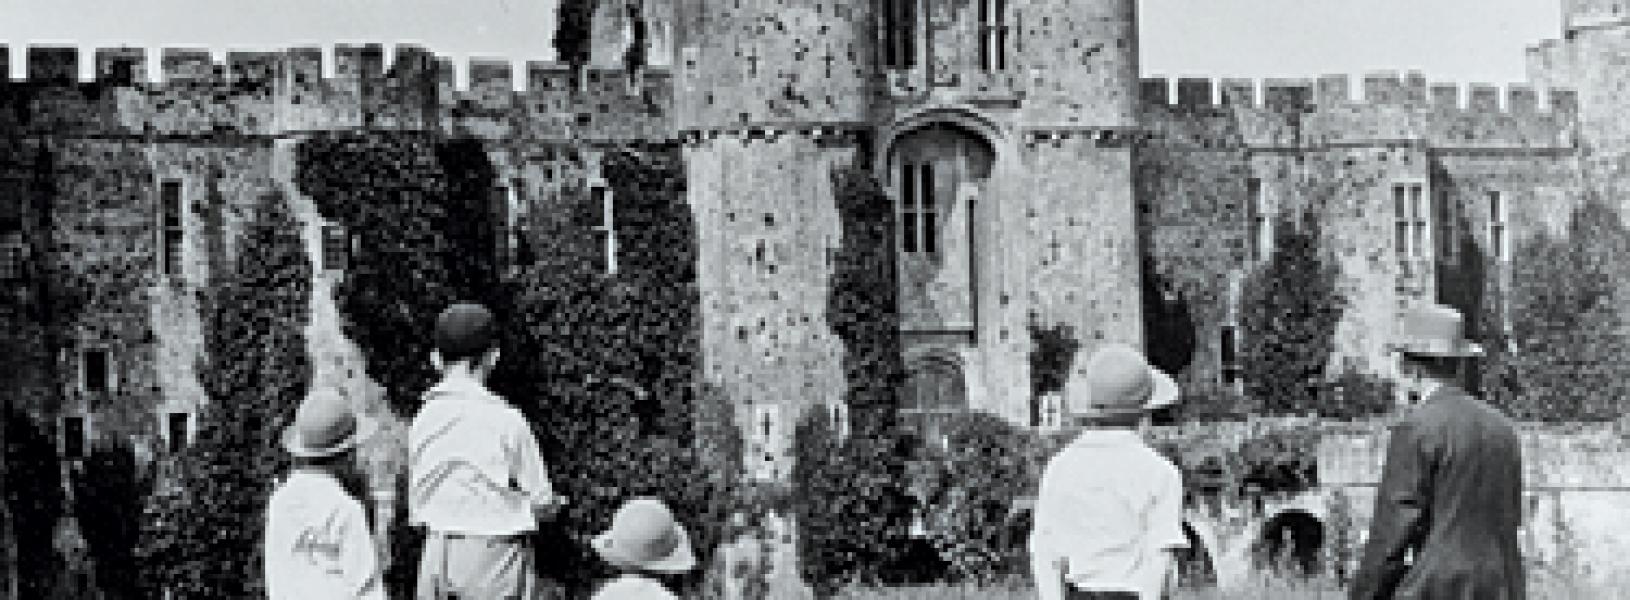 Herstmonceux Castle in the 1920s, prior to its restoration. 